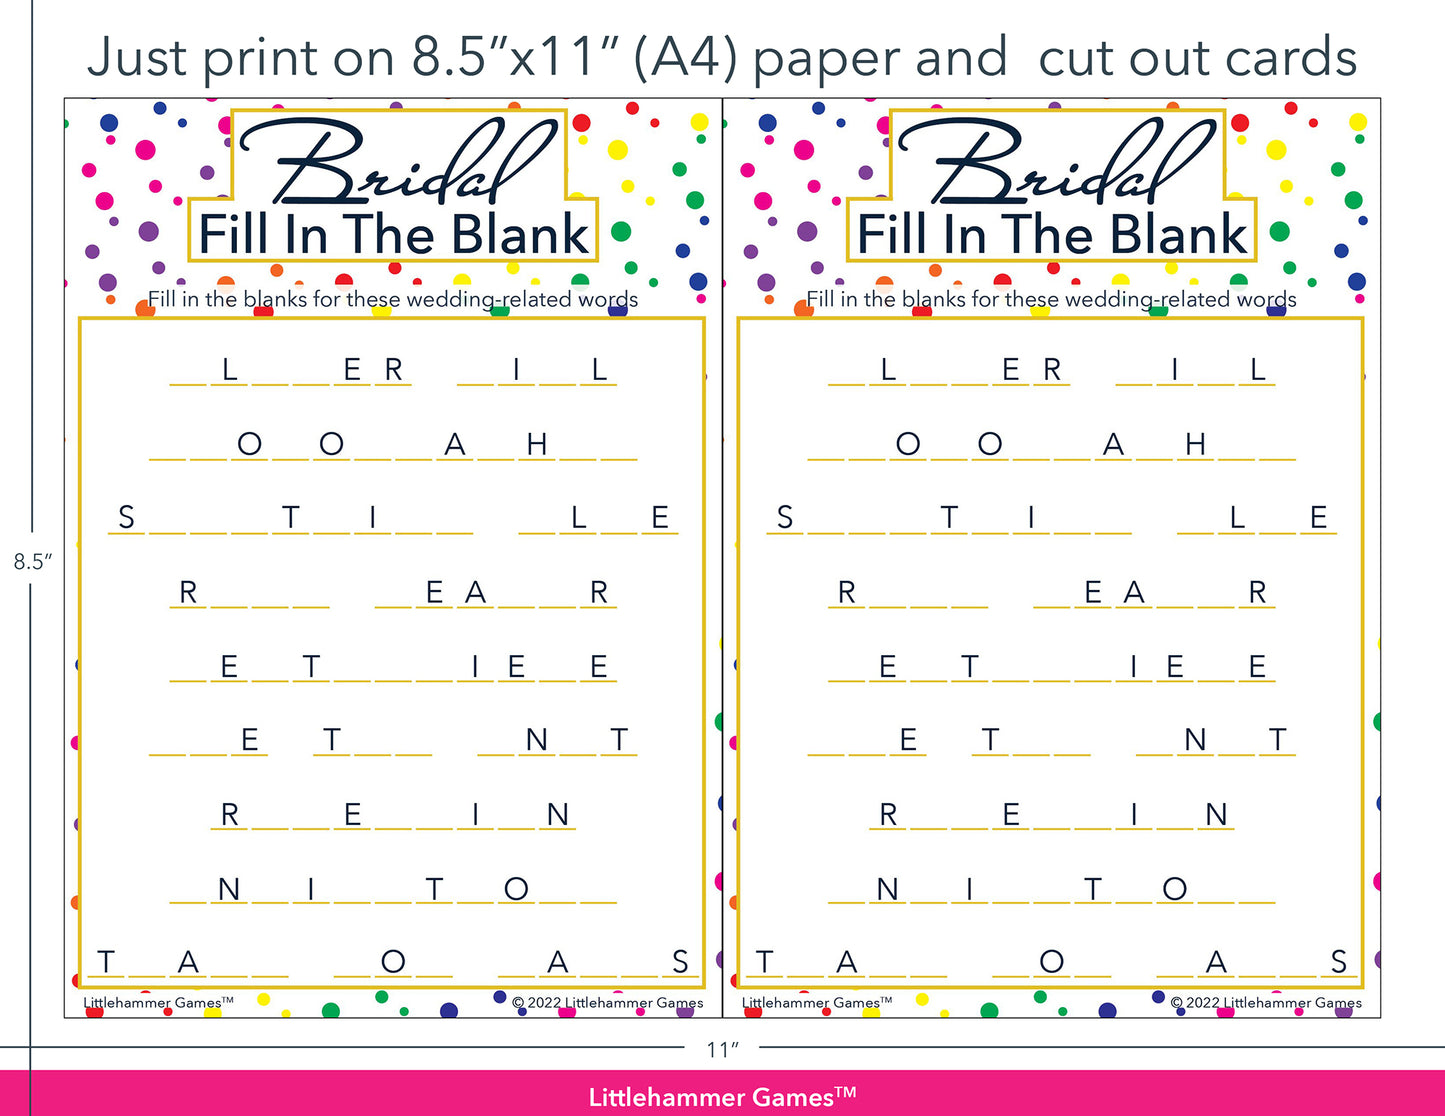 Bridal Fill in the Blank rainbow polka dot game cards with printing instructions